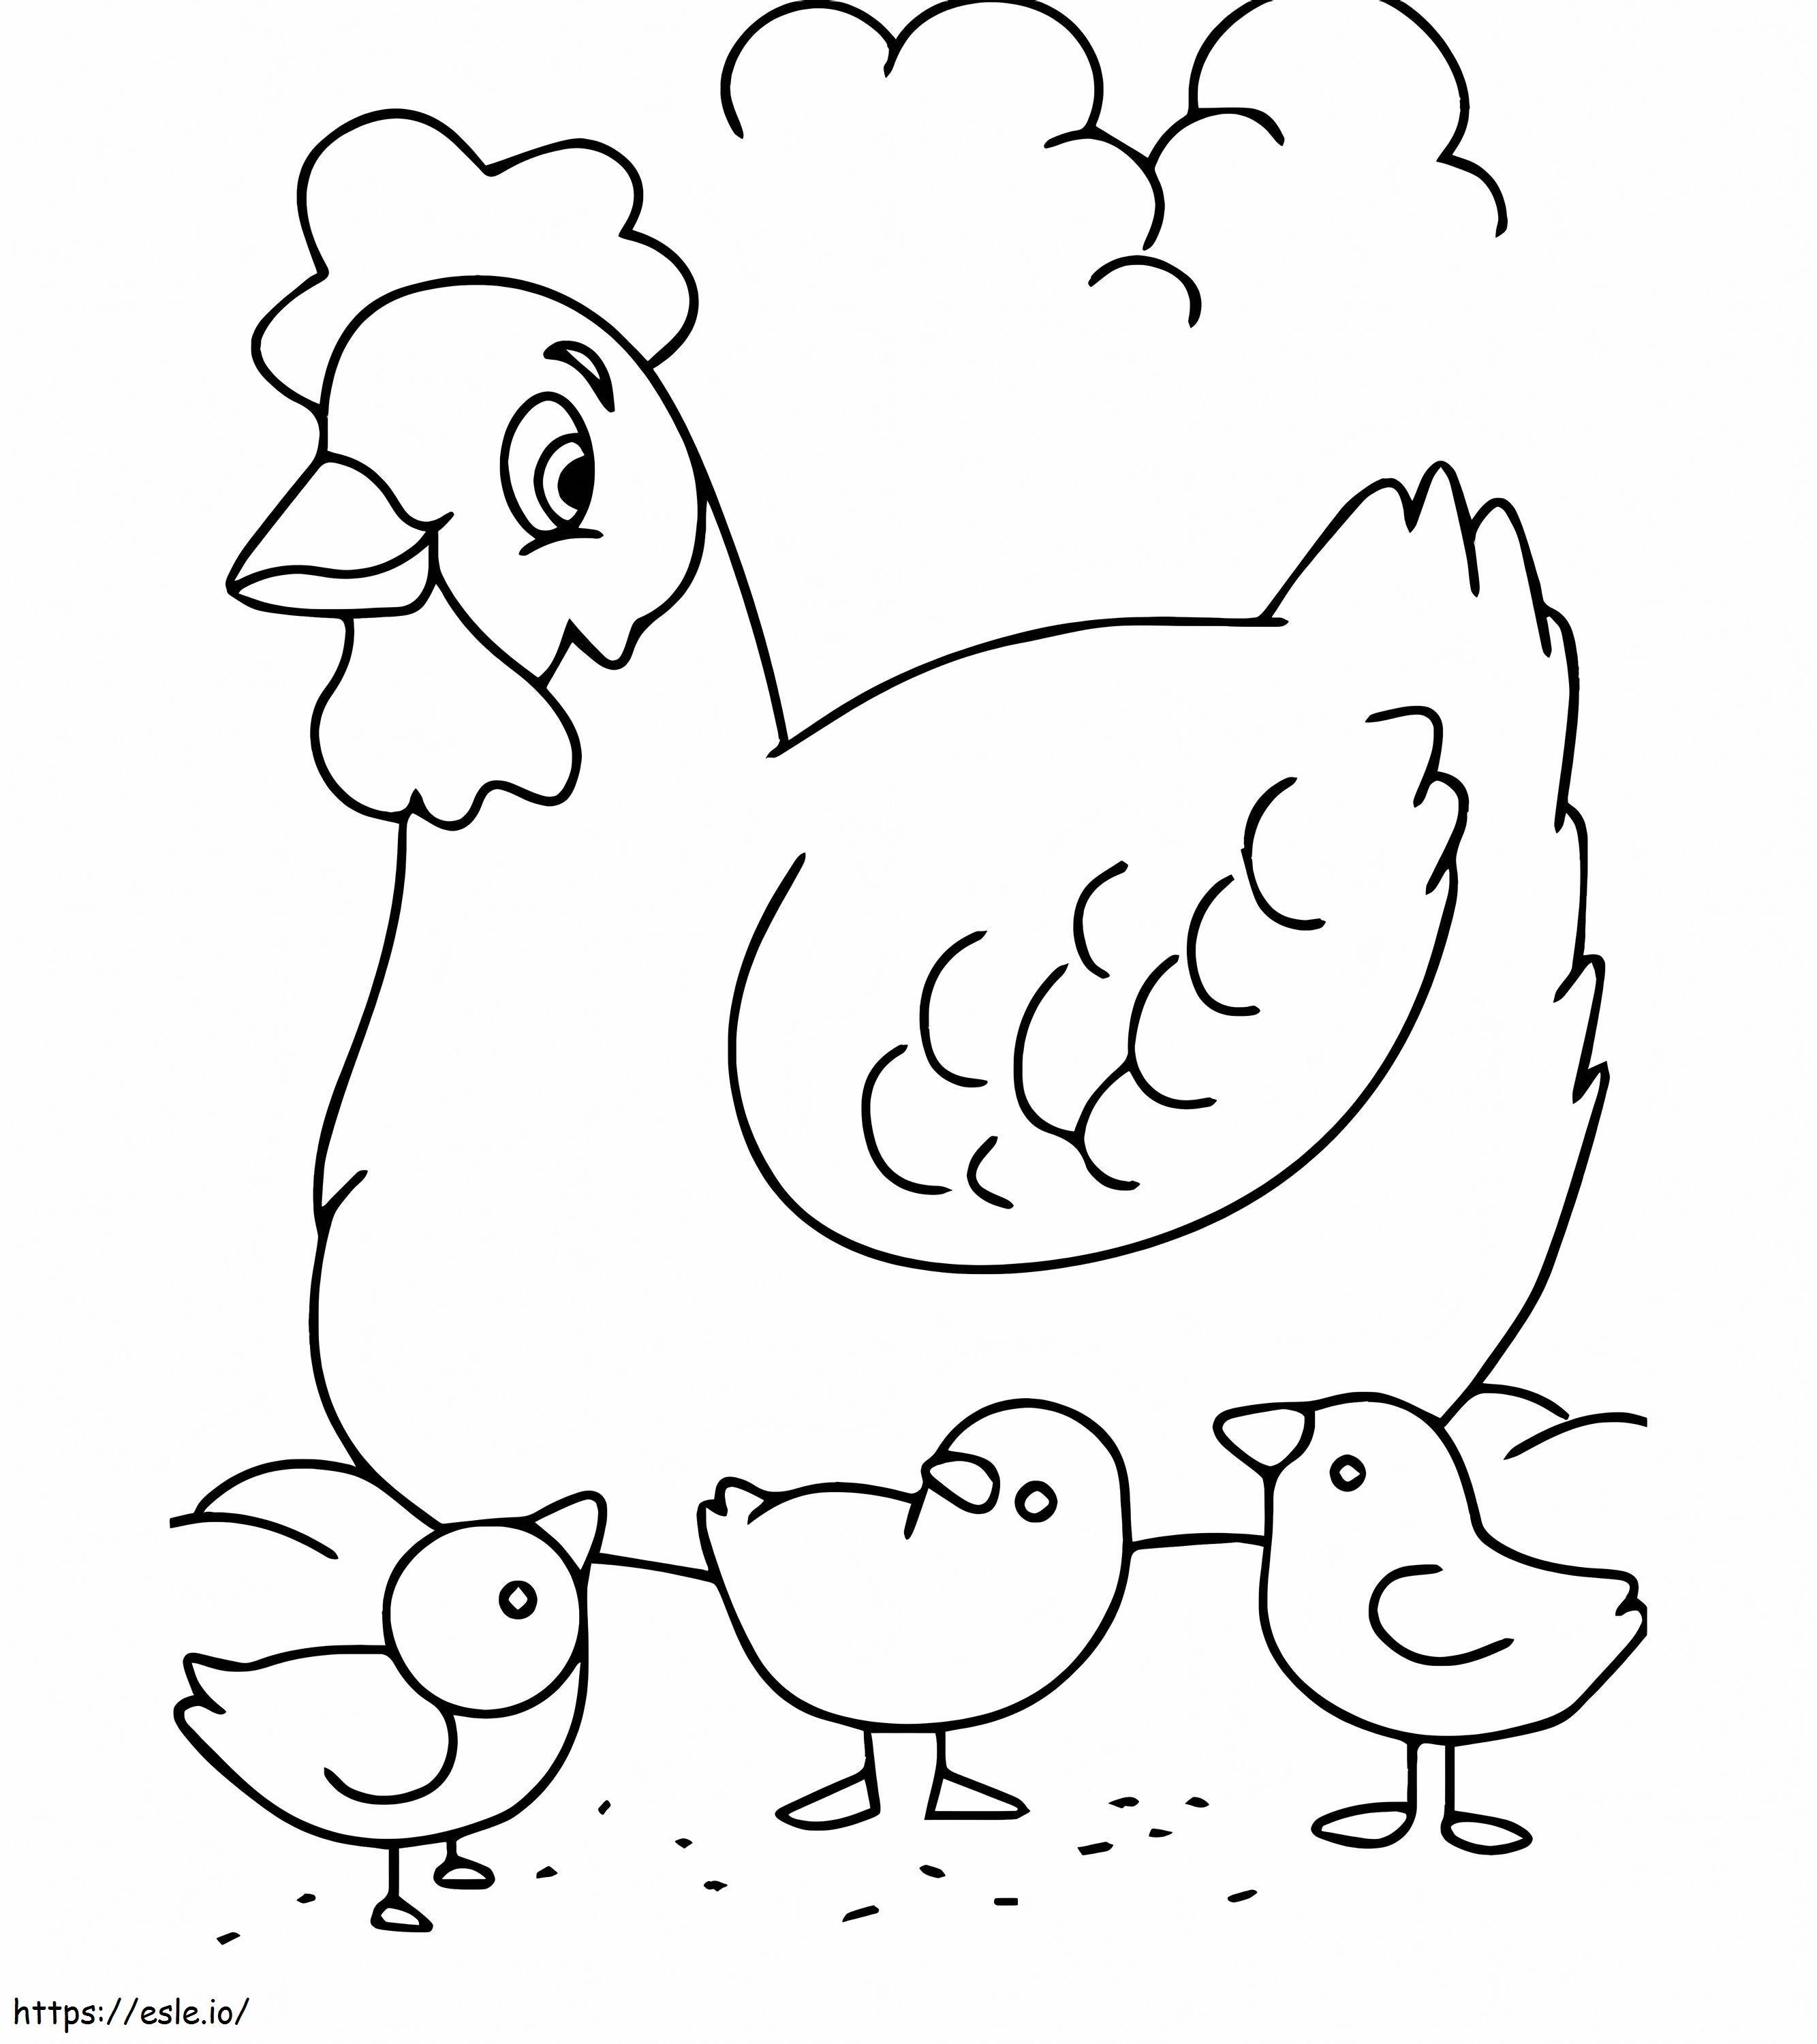 Chicken In A Farm coloring page